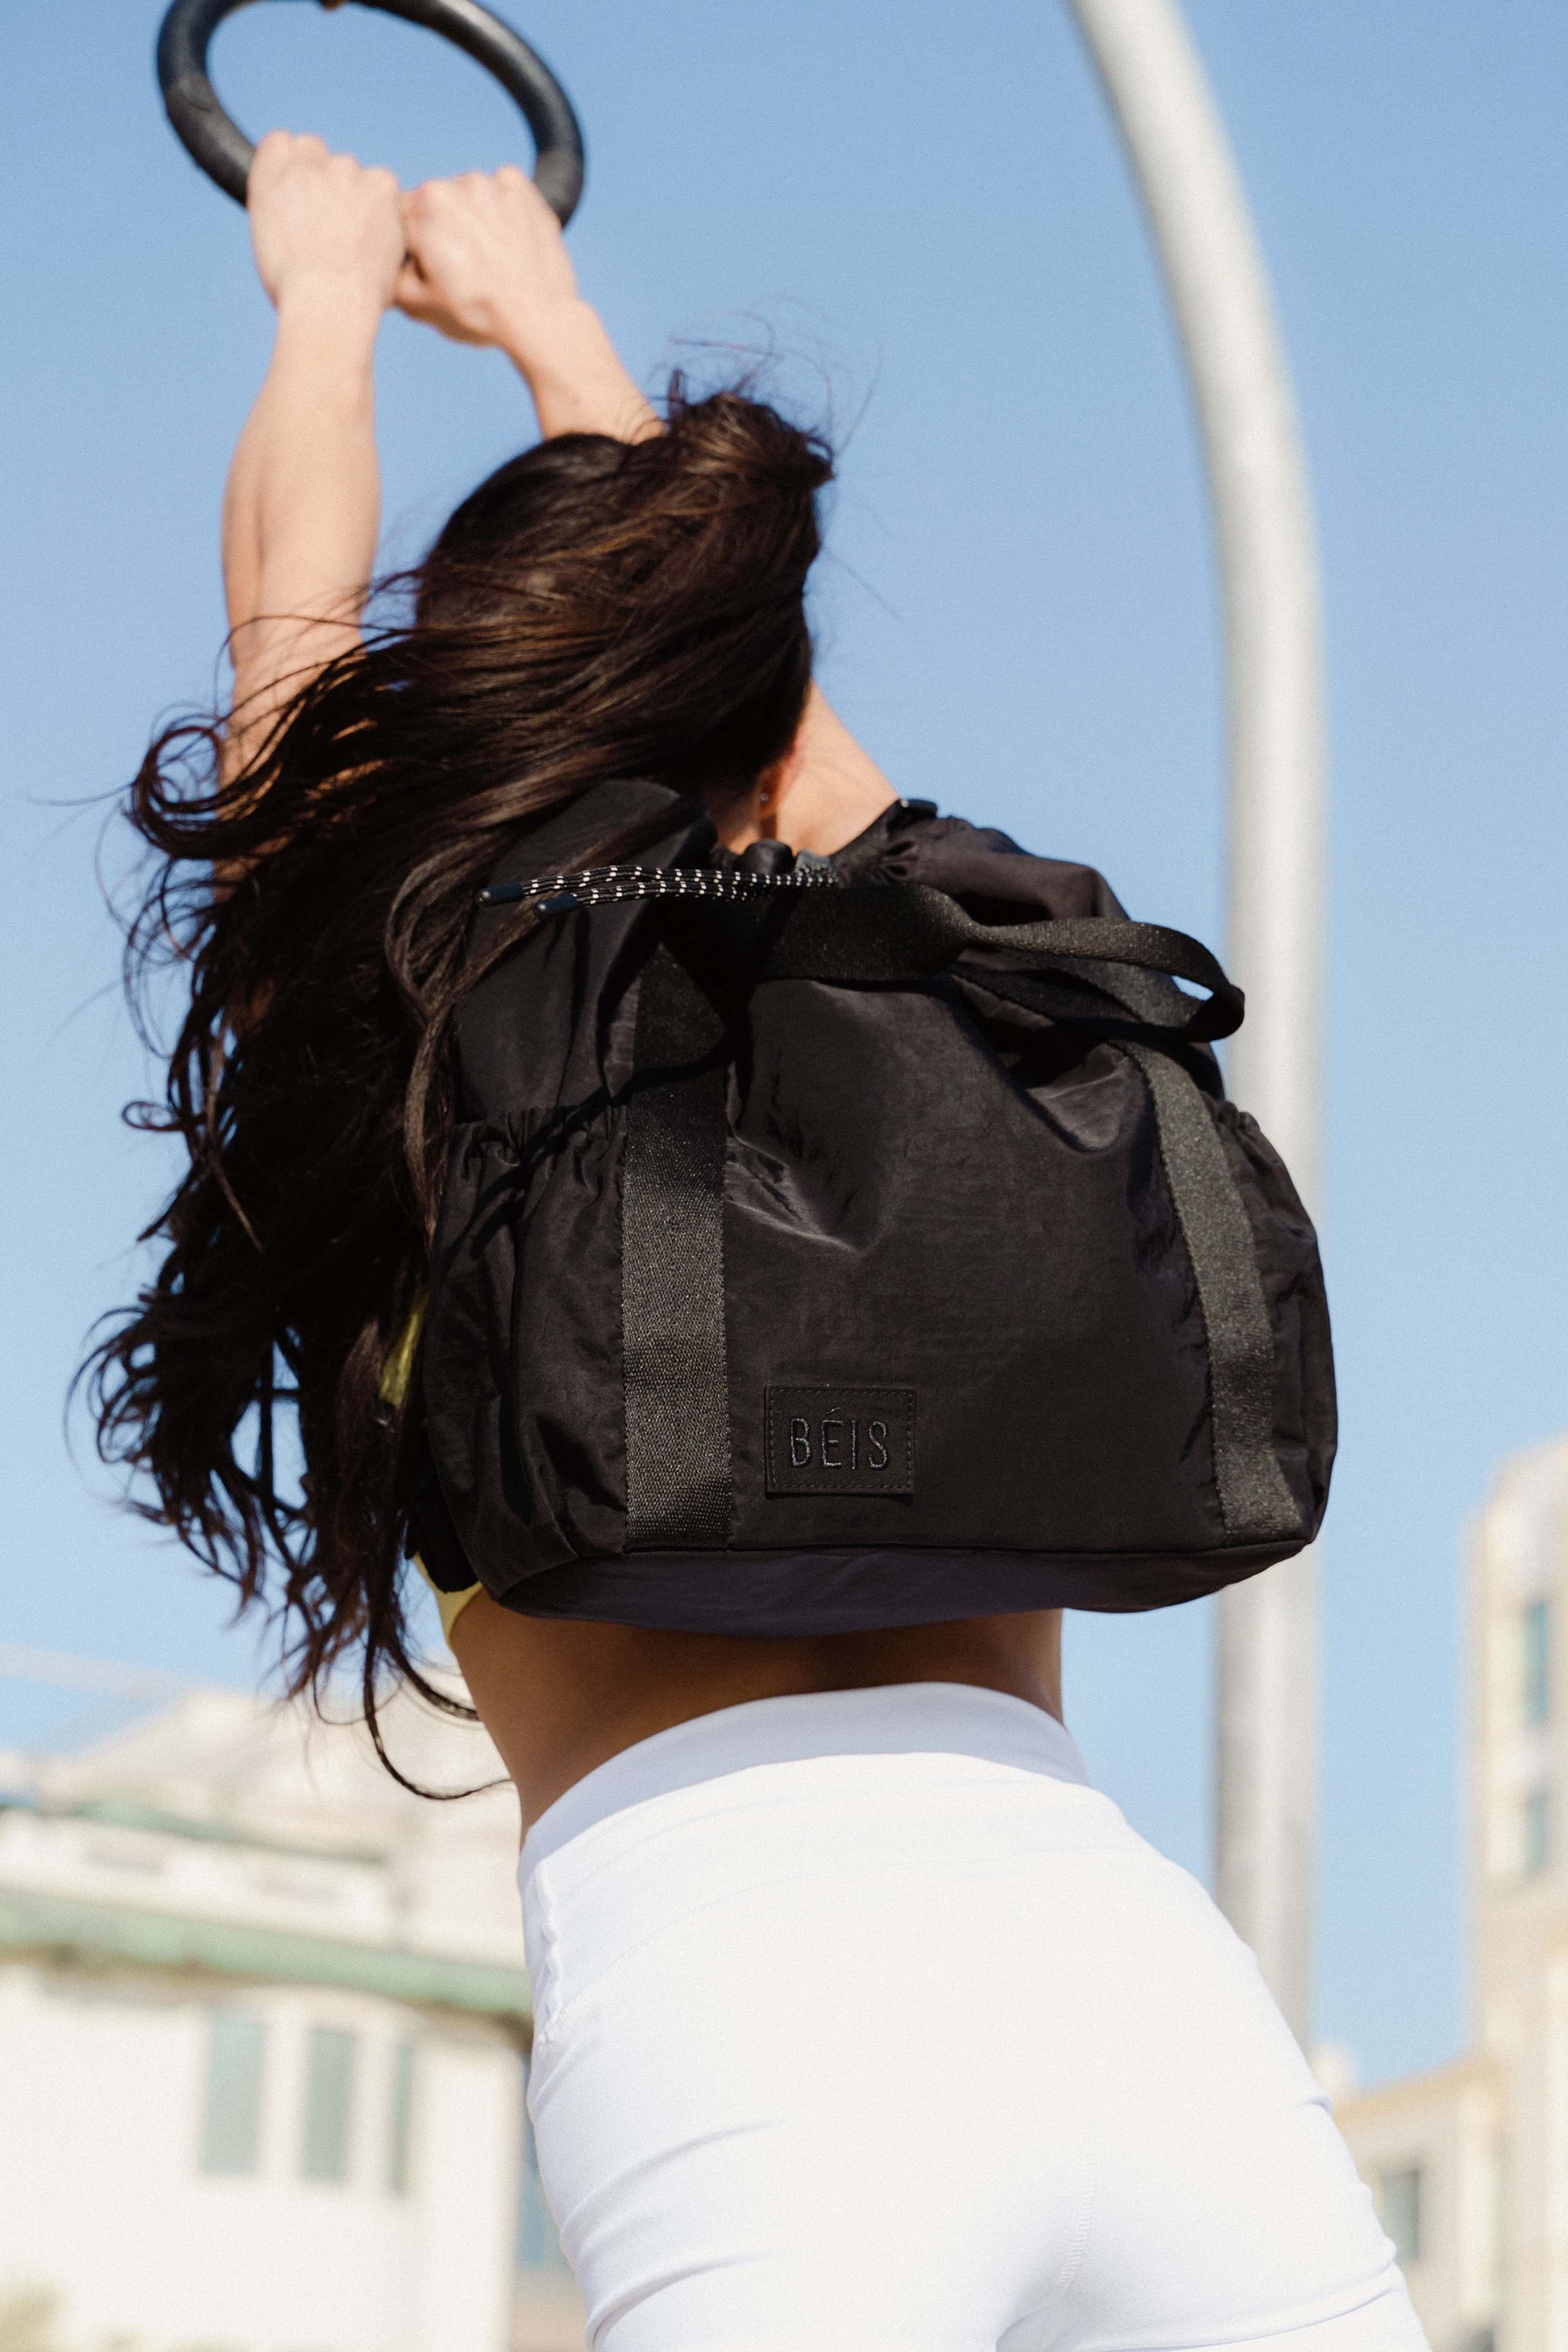 Sport Tote Black Front on Model on Gymnastic Rings